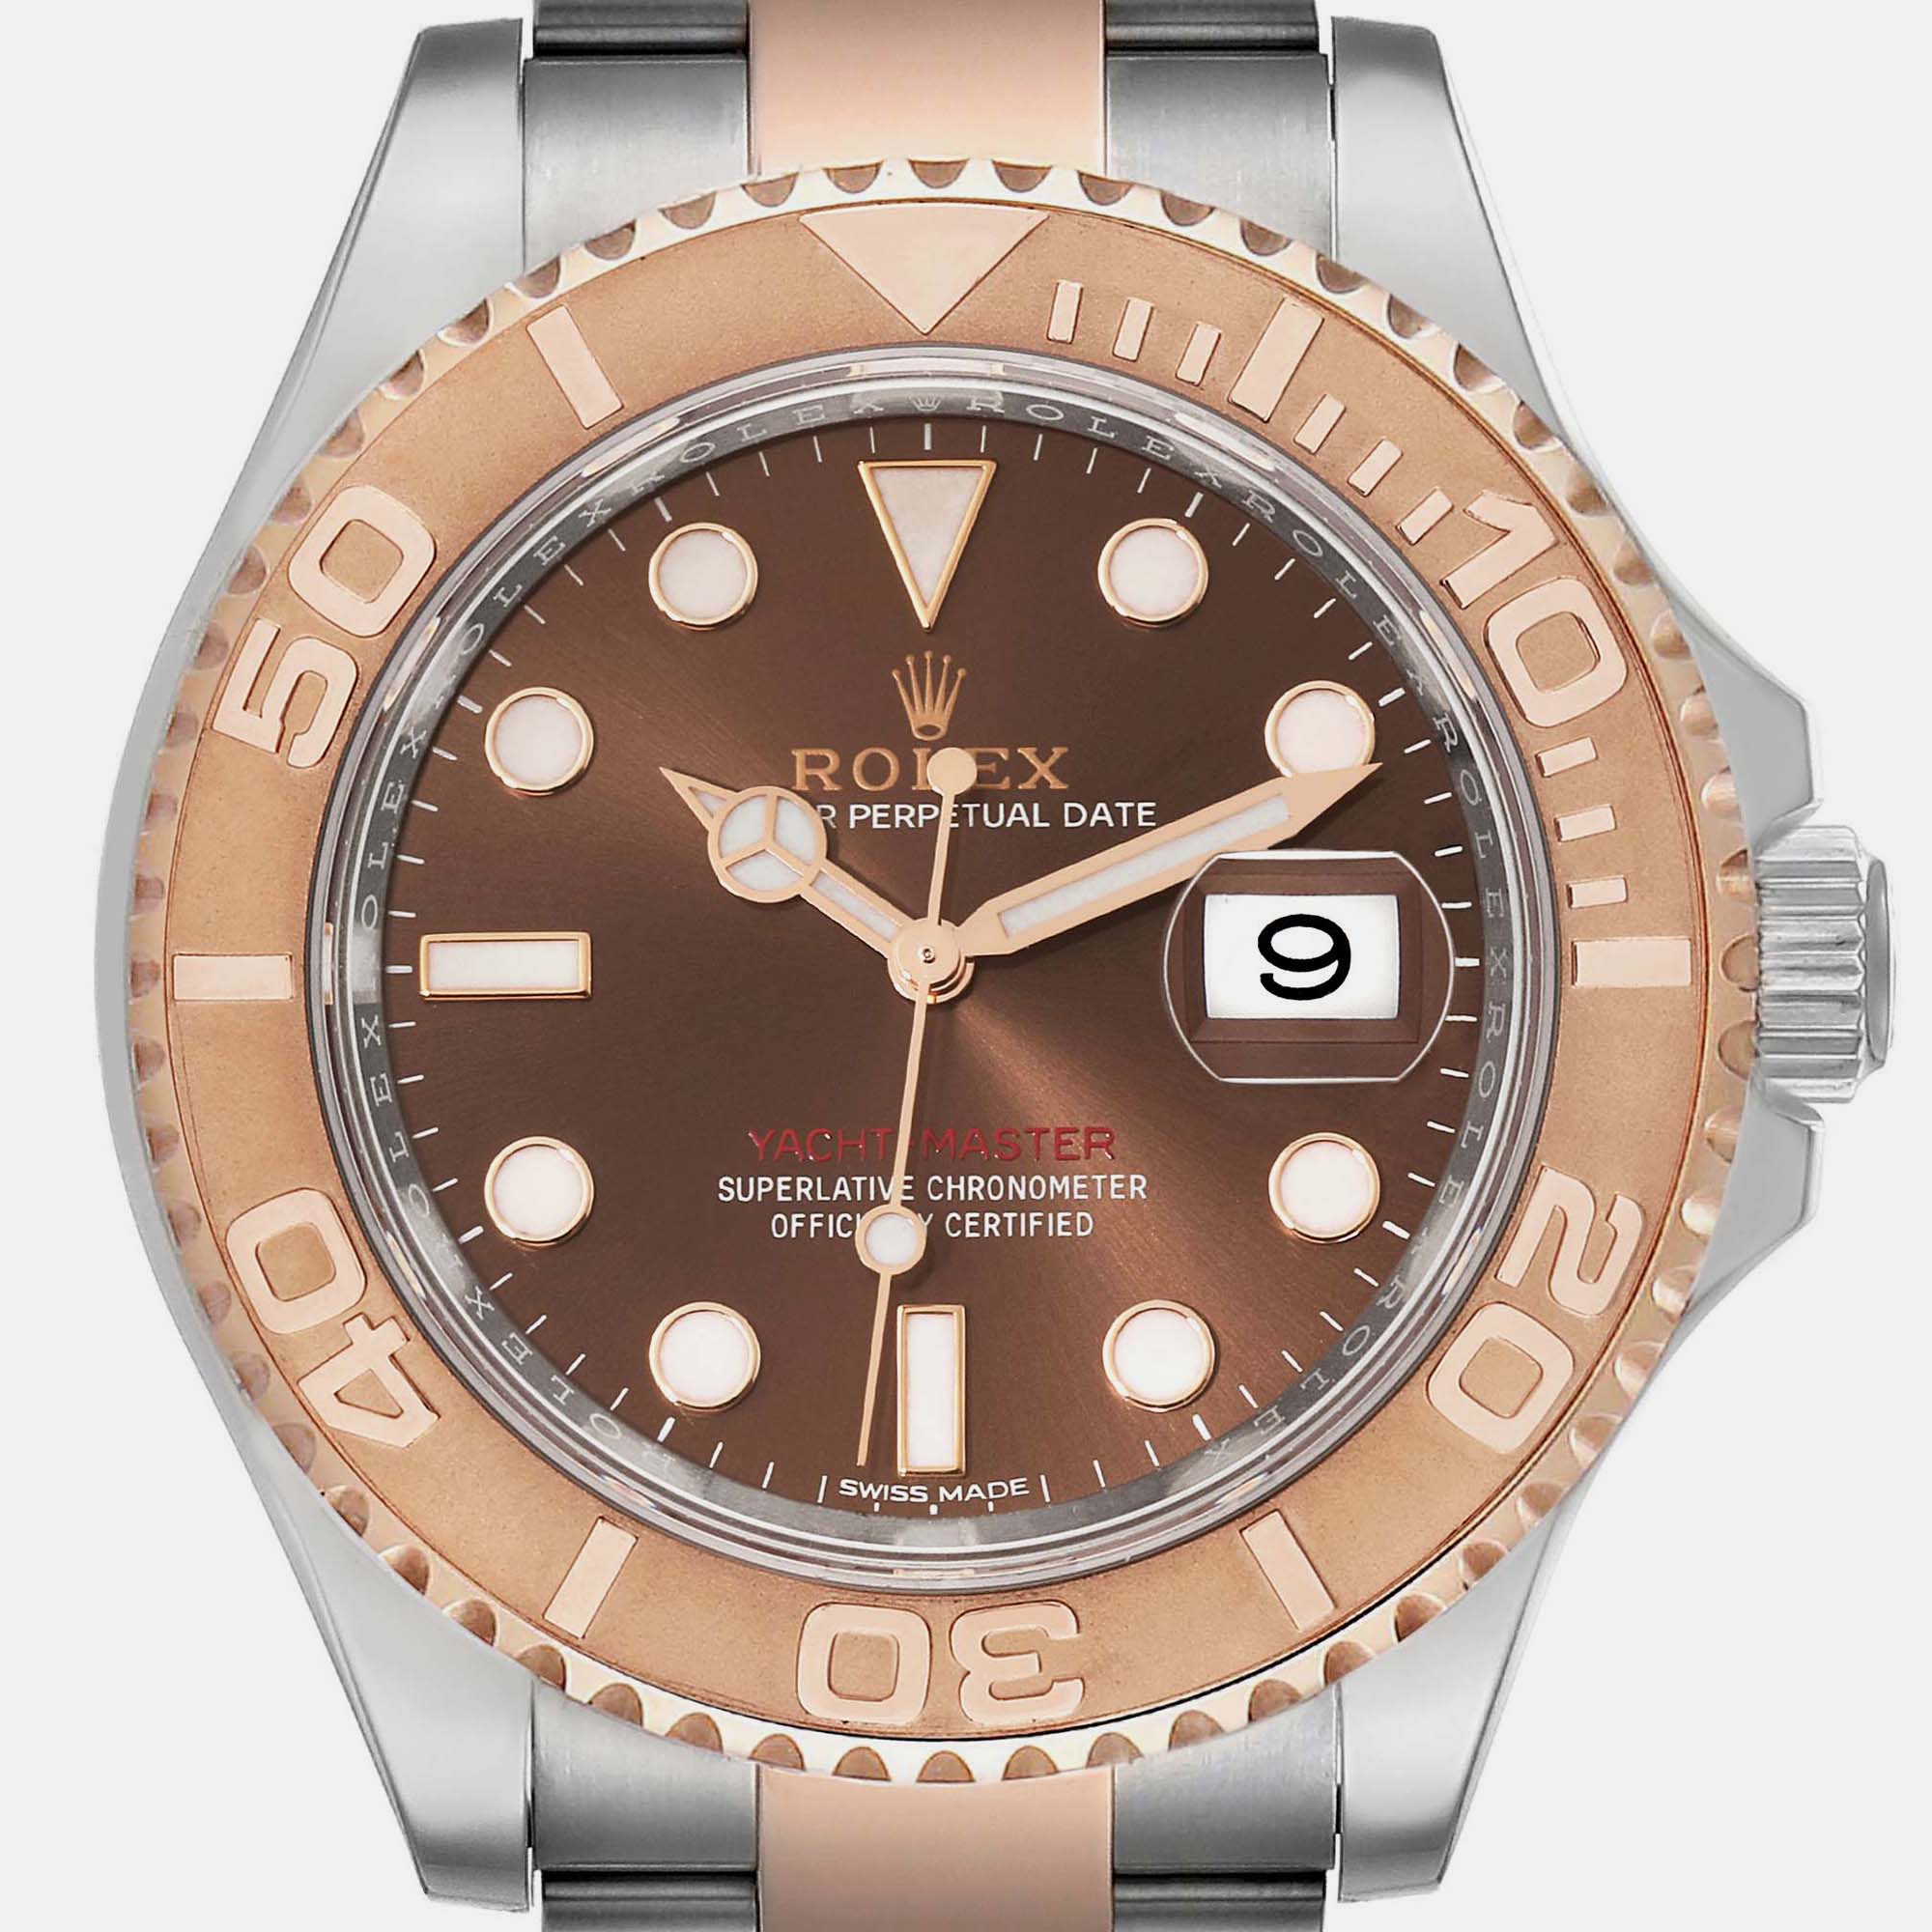 Rolex Yachtmaster 40 Rose Gold Steel Brown Dial Mens Watch 116621 Box Card